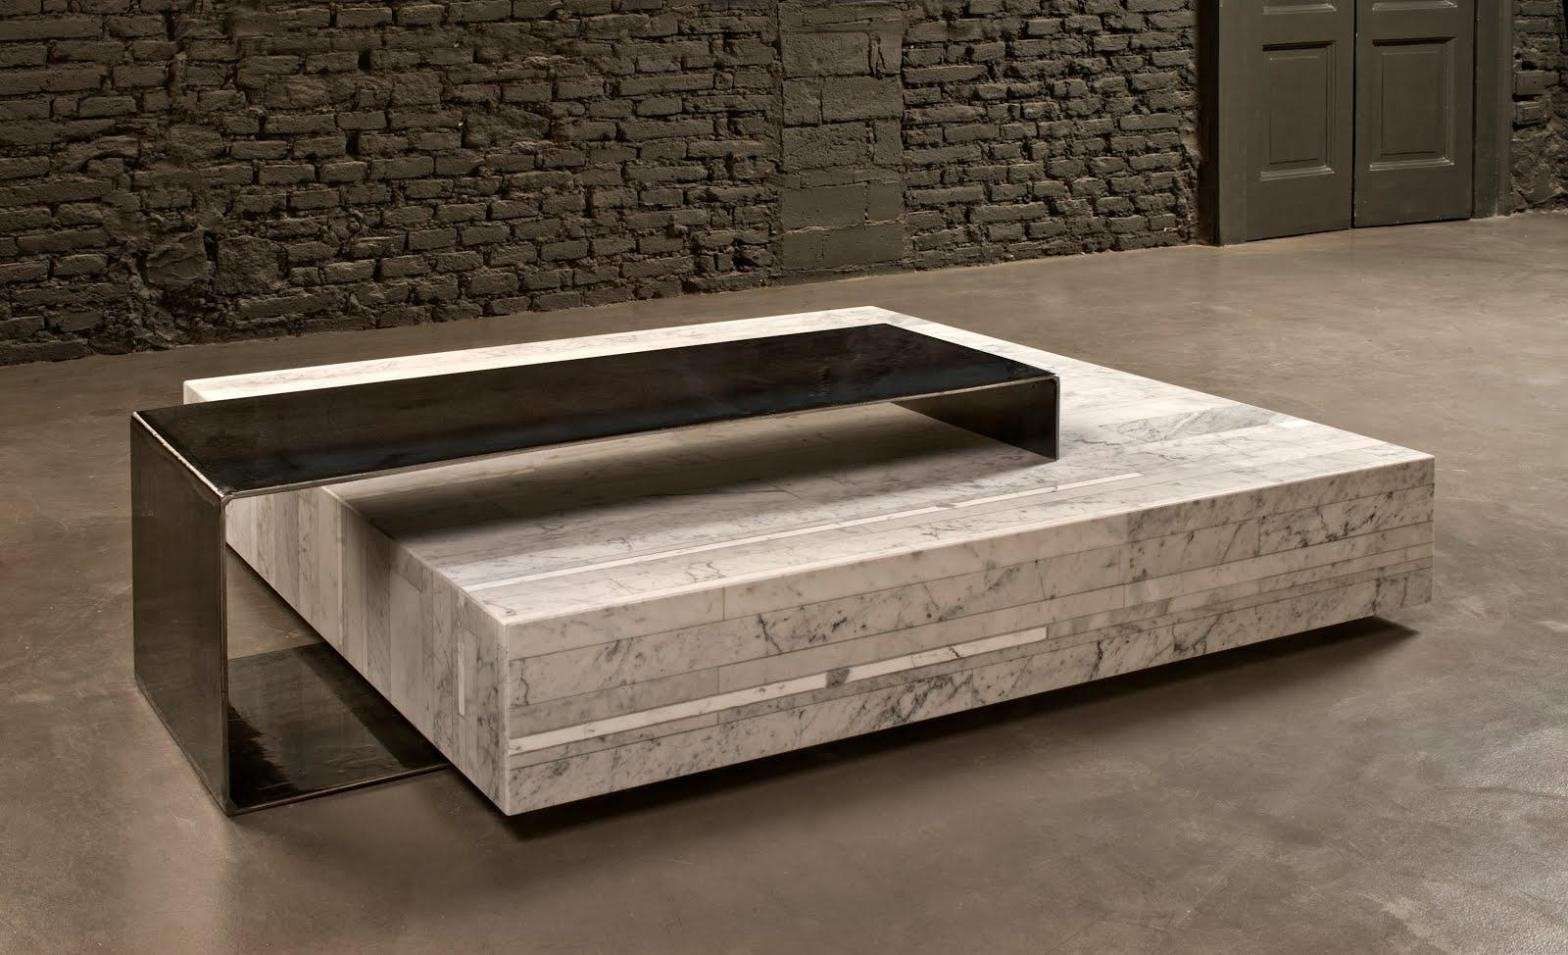 Home Design: Furniture Luxury Coffee Tables Ideas Black And White Intended For Most Popular Luxury Coffee Tables (Gallery 10 of 20)